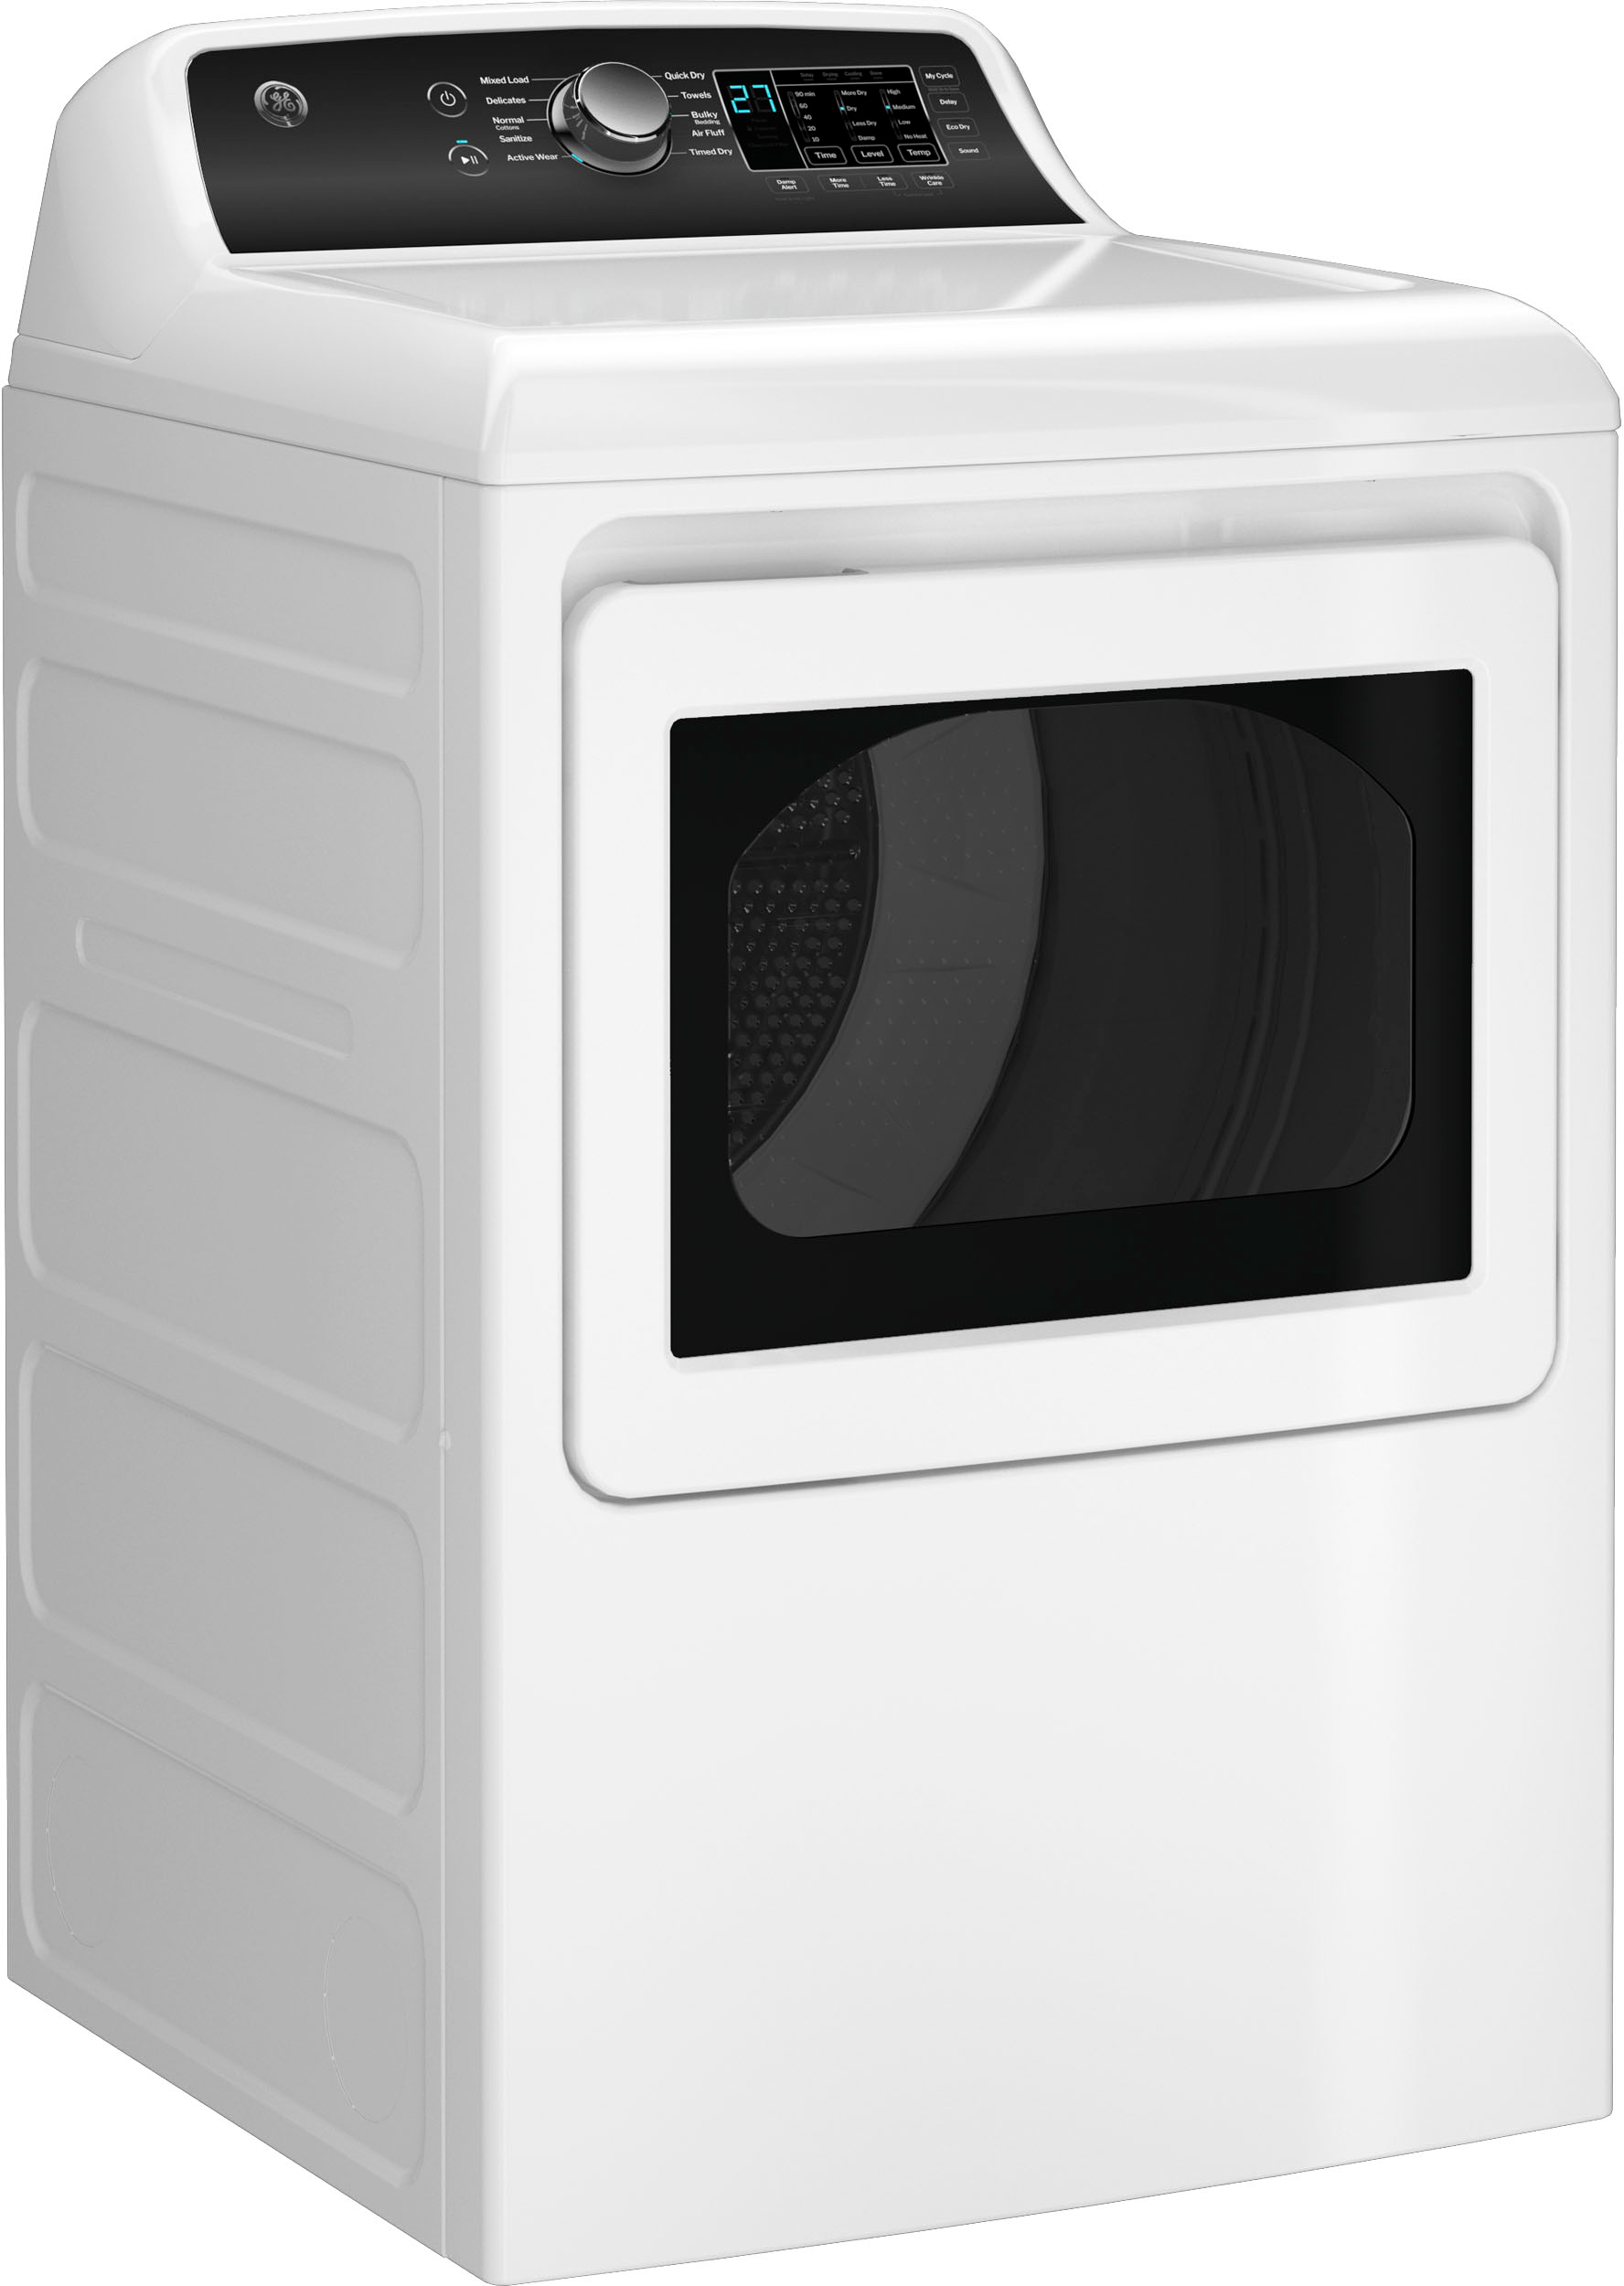 Angle View: GE - 7.4 cu. ft. Top Load Gas Dryer with Sensor Dry - White on White